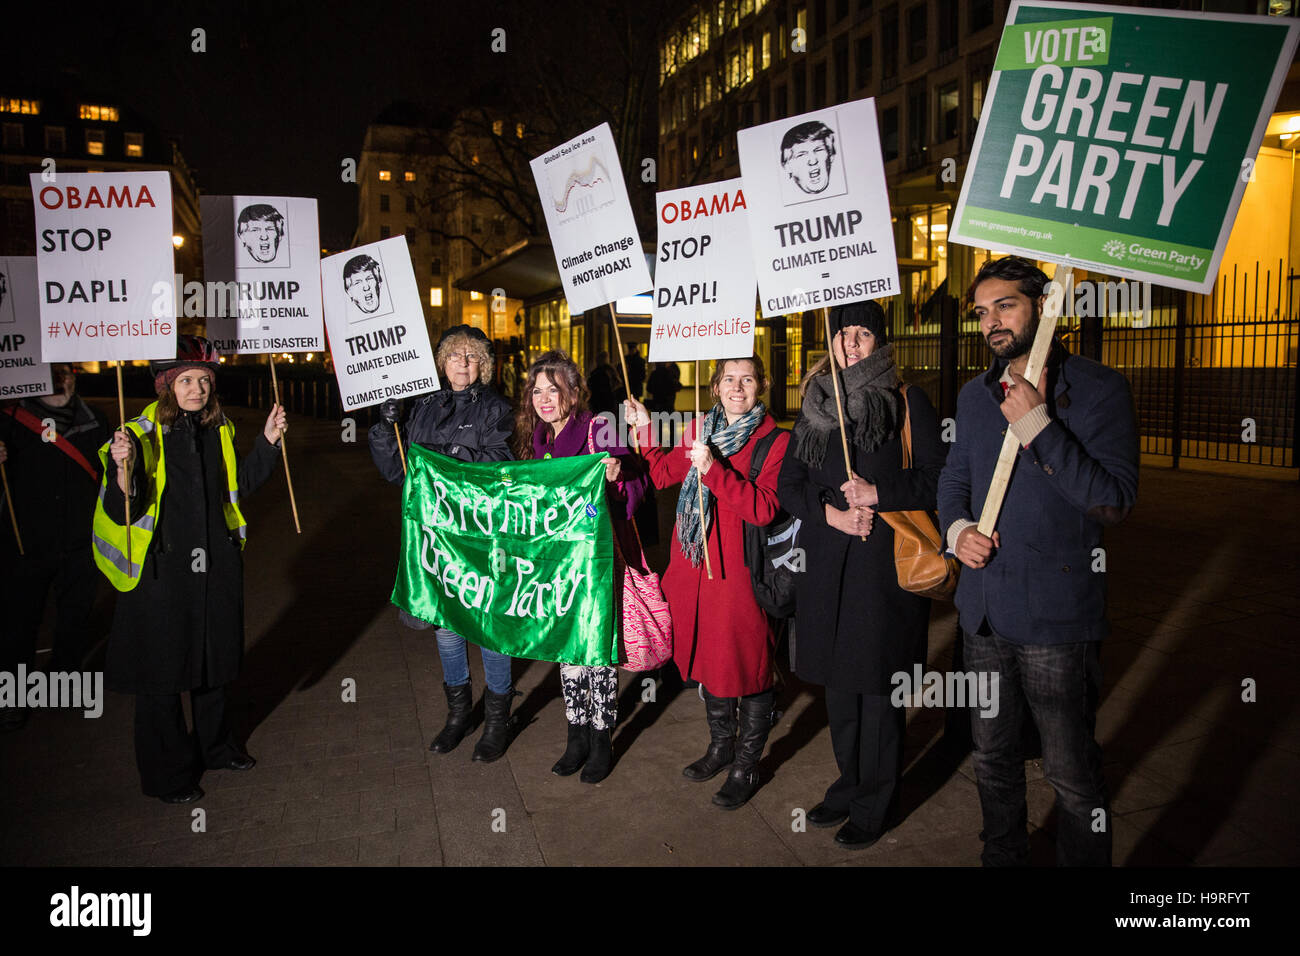 London, UK. 25th November, 2016. Activists from the Campaign Against Climate Change protest outside the US Embassy in solidarity with American climate activists preparing to campaign against President Elect Donald Trump and also in solidarity with those protesting at Standing Rock. Credit:  Mark Kerrison/Alamy Live News Stock Photo